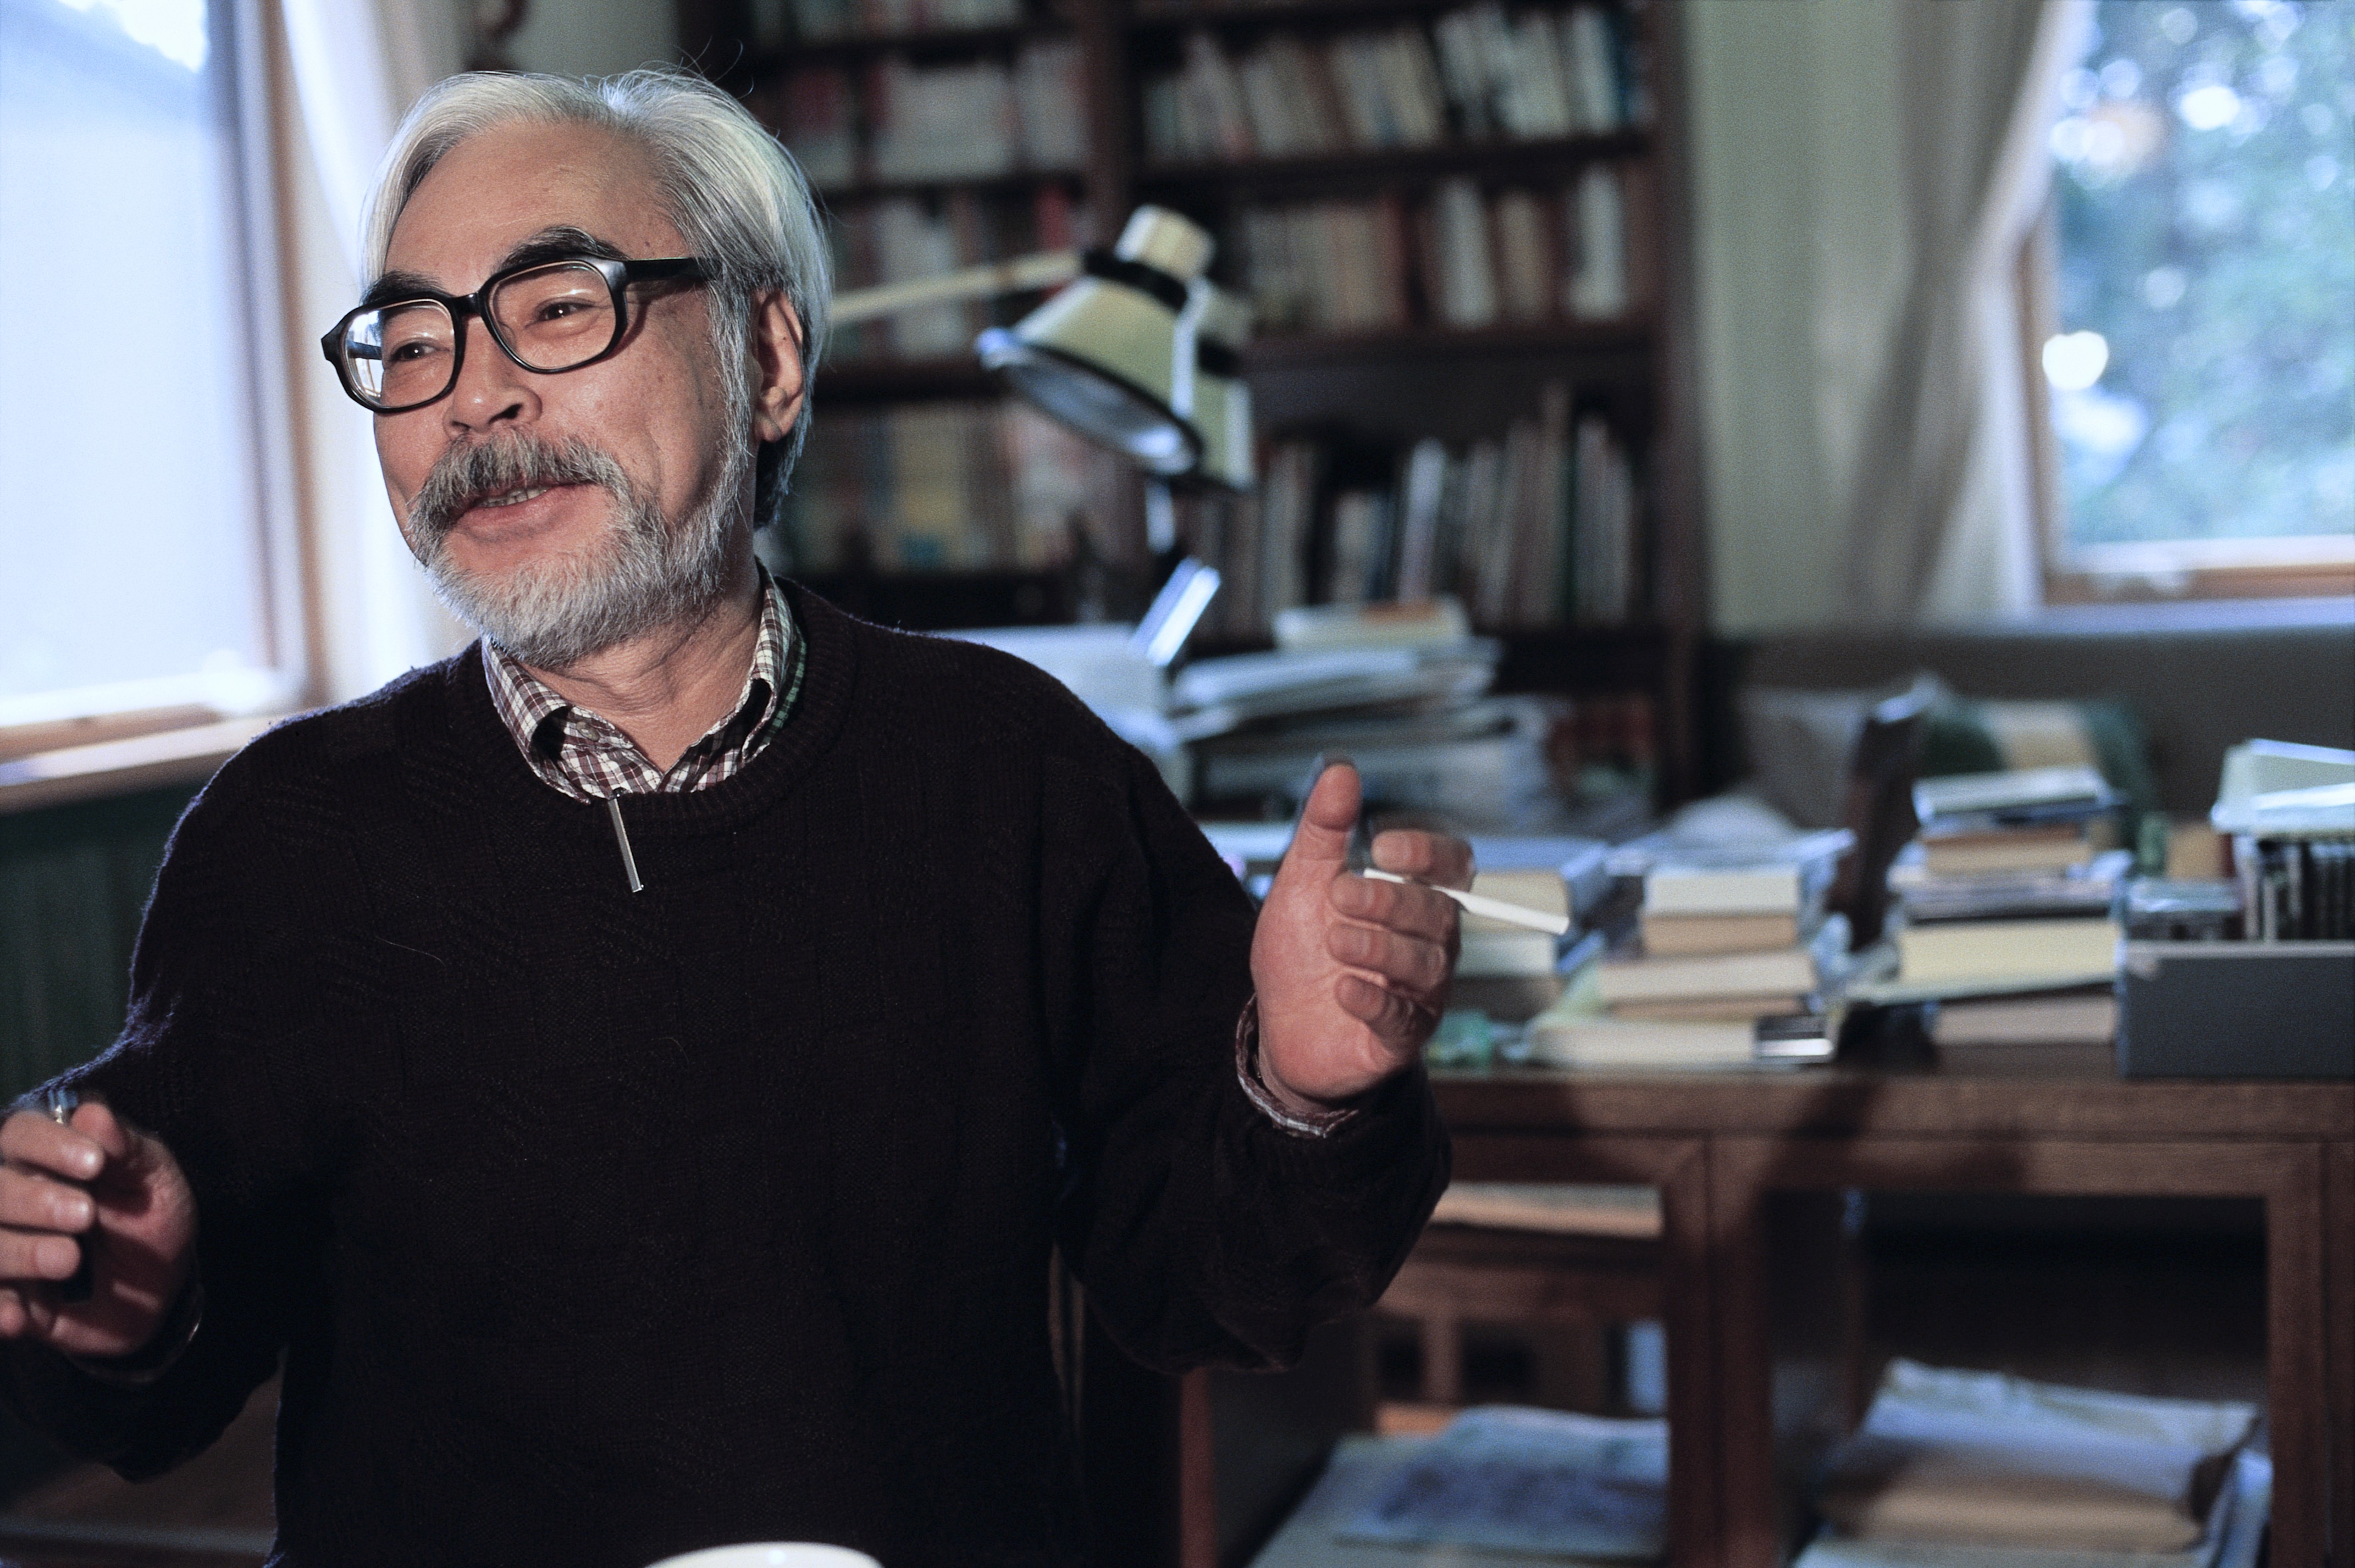 Japanese animator Hayao Miyazaki will be the subject of the inaugural exhibition at the Academy Museum of Motion Pictures in Los Angeles, due to open next year. Photo: Corbis